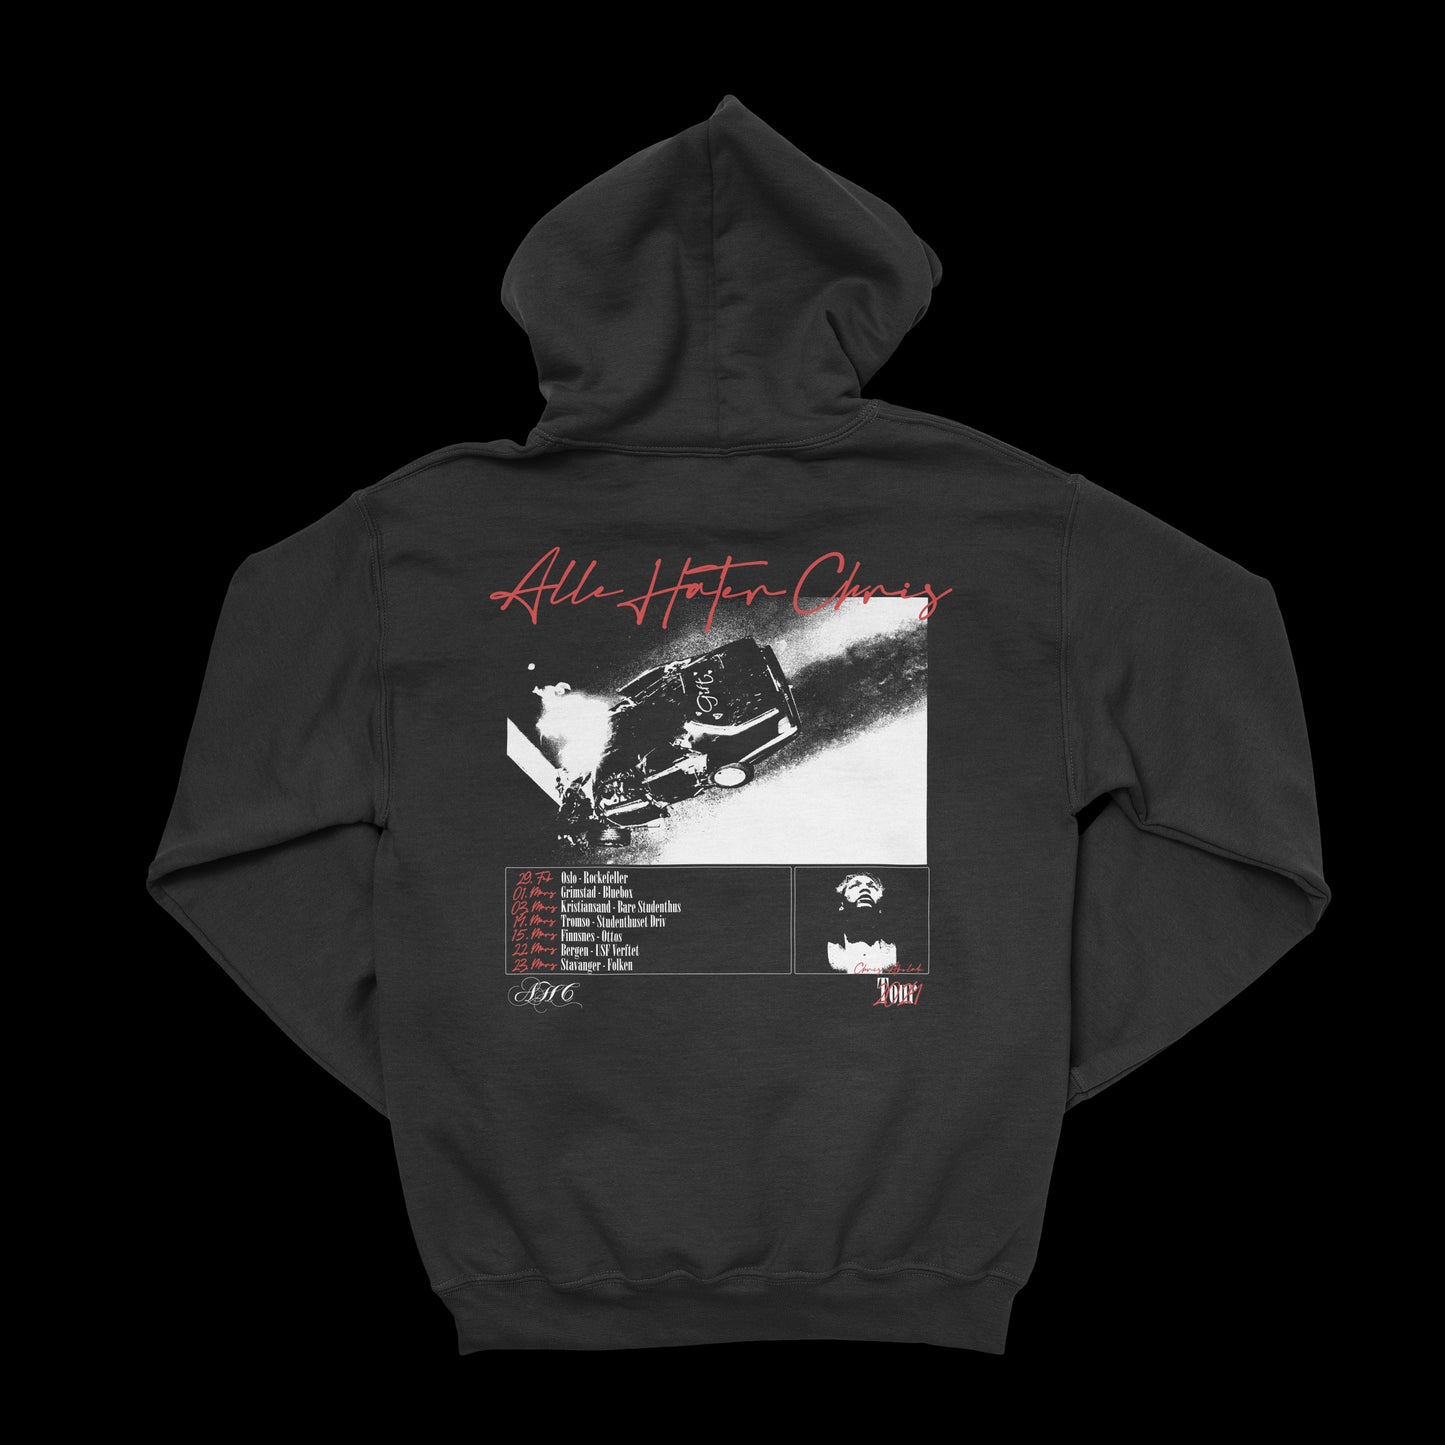 Alle Hater Chris - Tour Hoodie